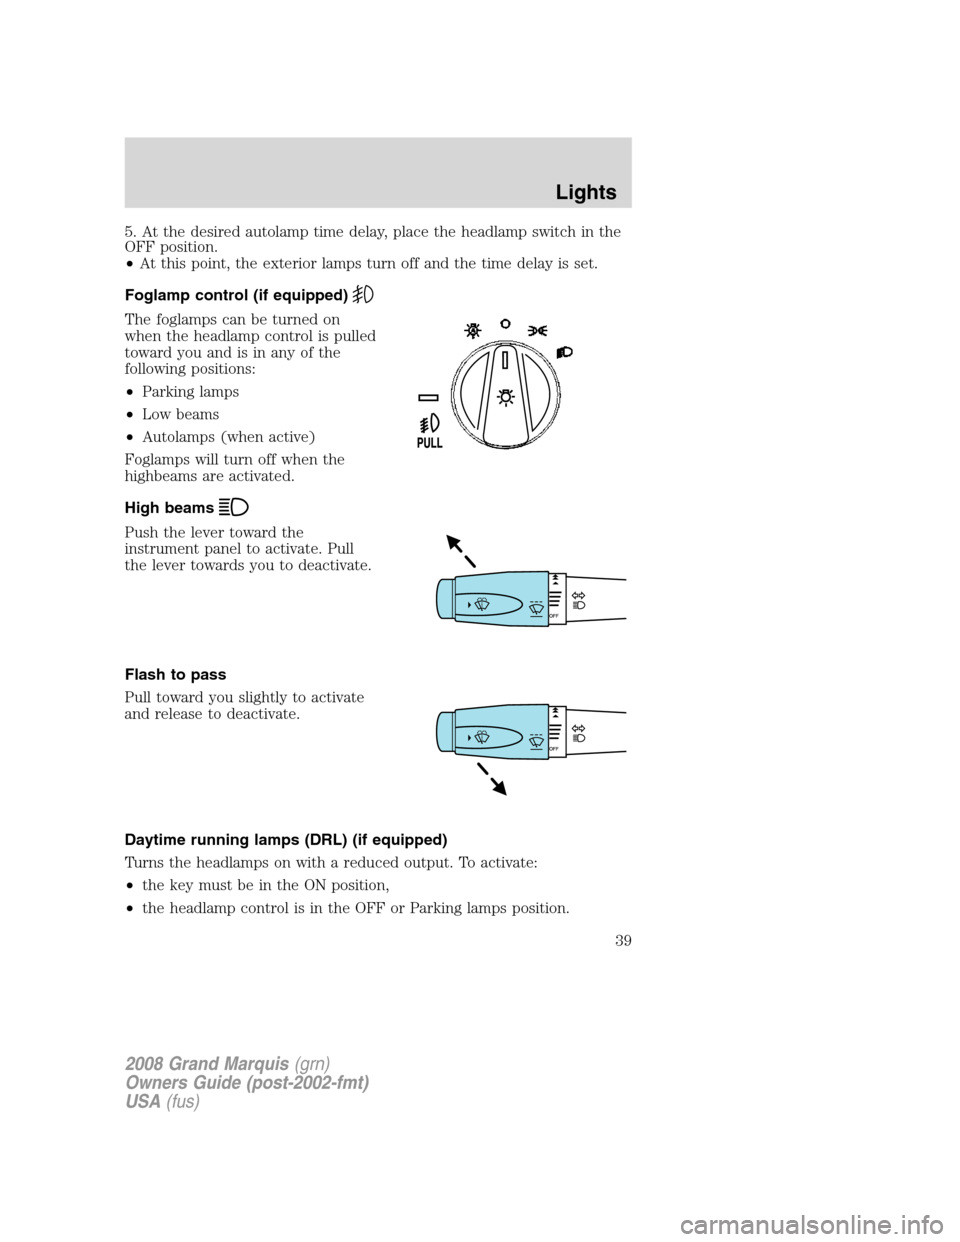 Mercury Grand Marquis 2008  s Owners Guide 5. At the desired autolamp time delay, place the headlamp switch in the
OFF position.
•At this point, the exterior lamps turn off and the time delay is set.
Foglamp control (if equipped)
The foglamp